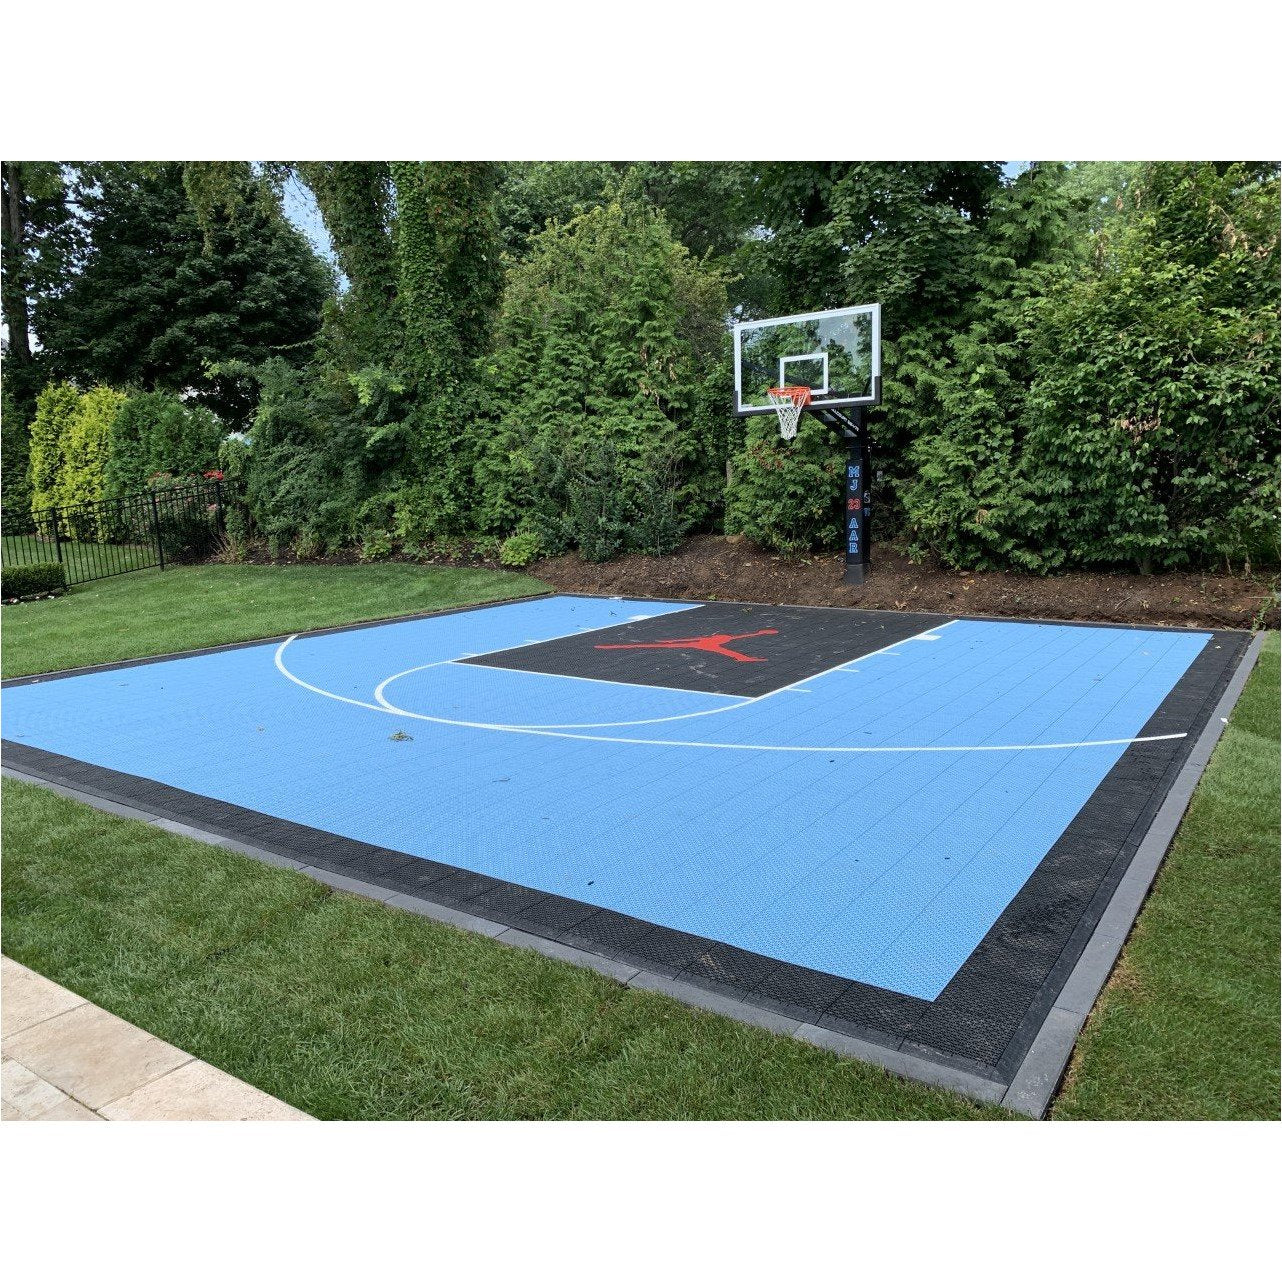 Get the Look Custom Basketball Court Tiles Any Size to Fit your Sp